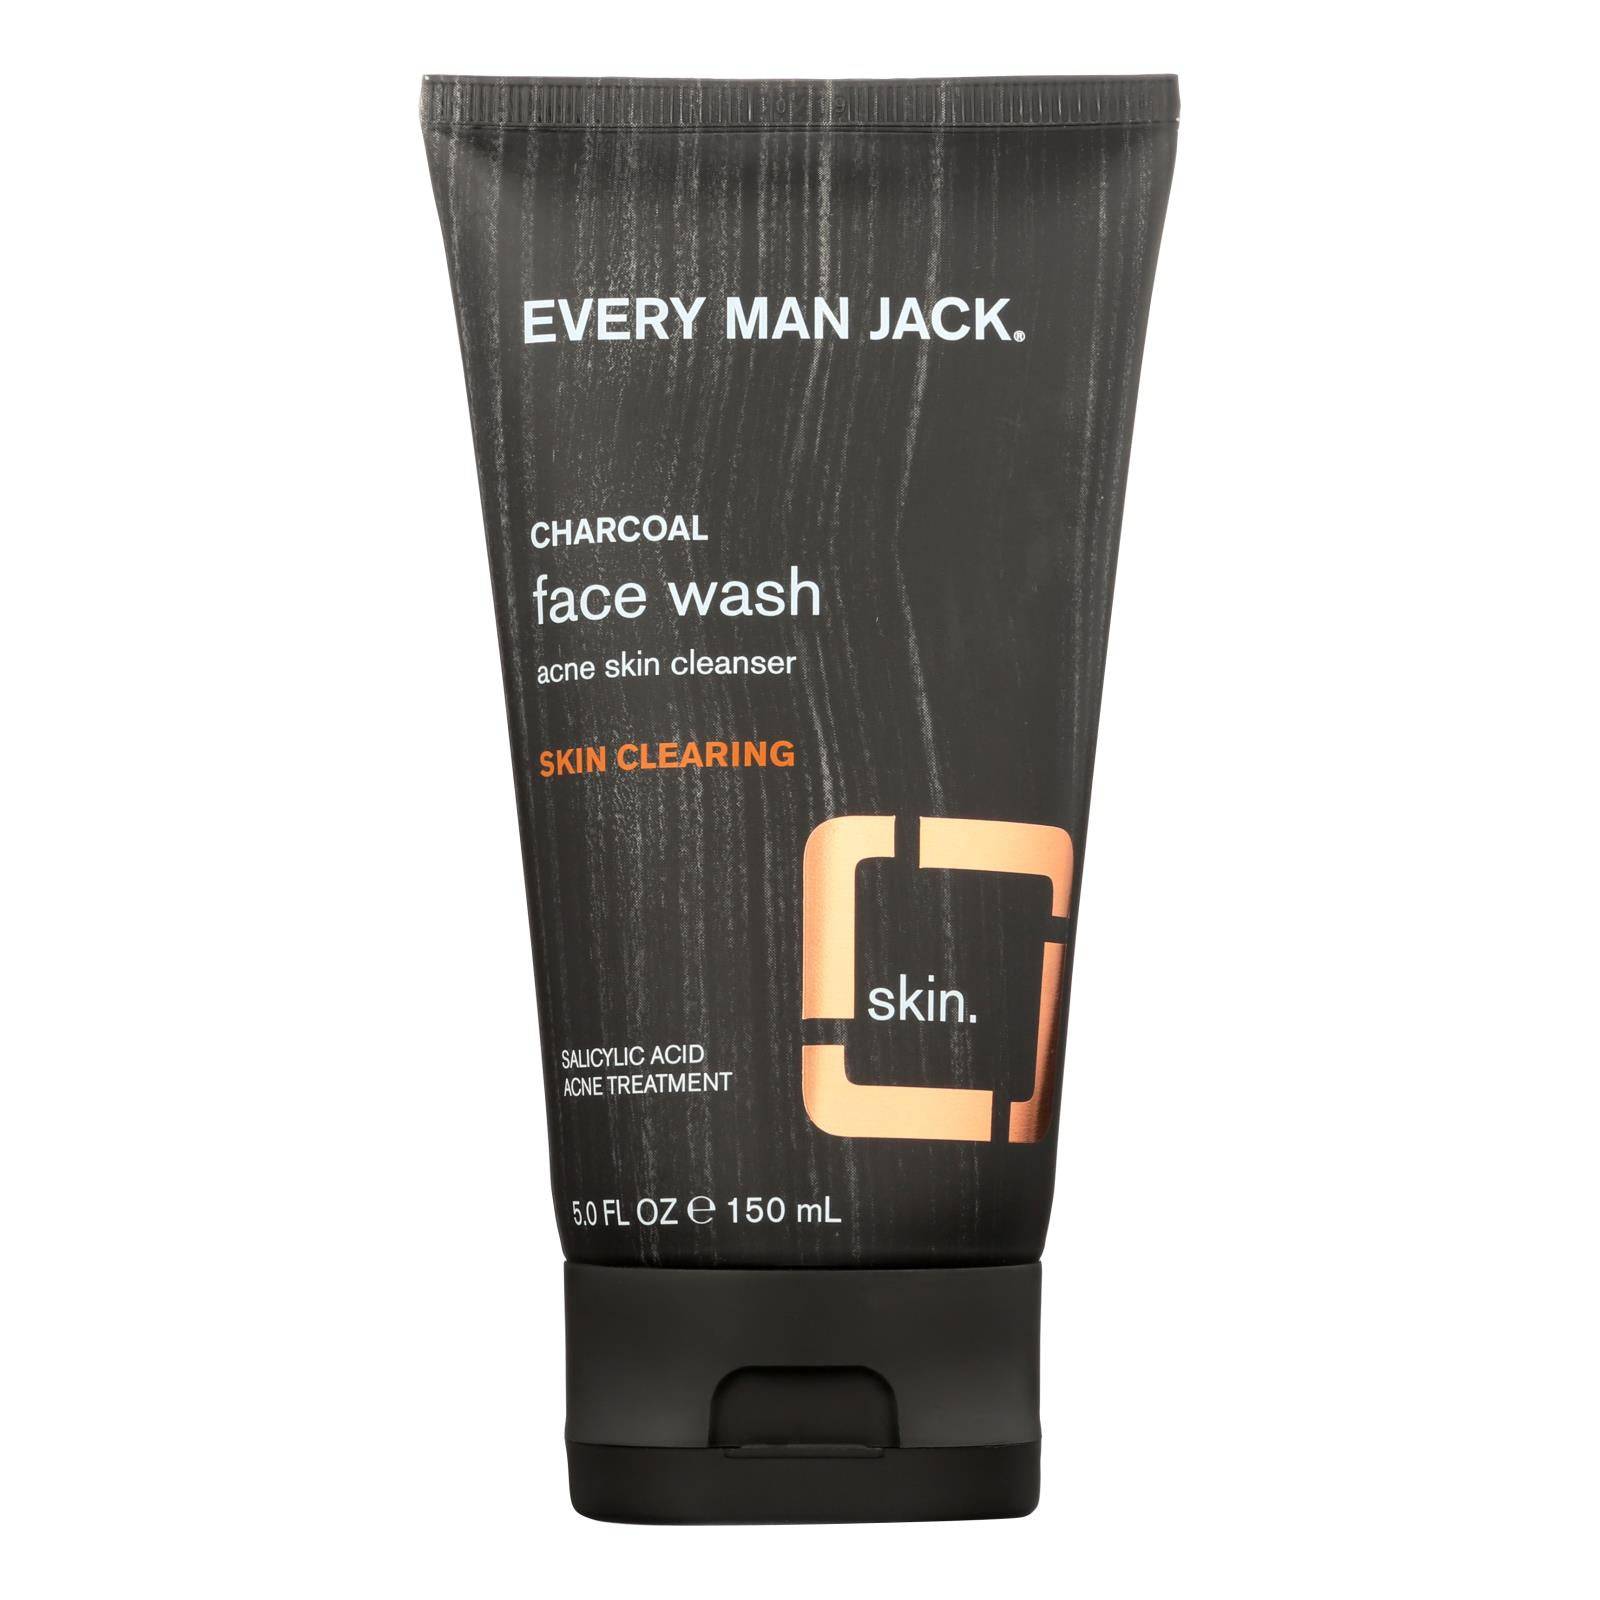 Buy Every Man Jack Face Wash - Skin Clearing - 5 Oz  at OnlyNaturals.us